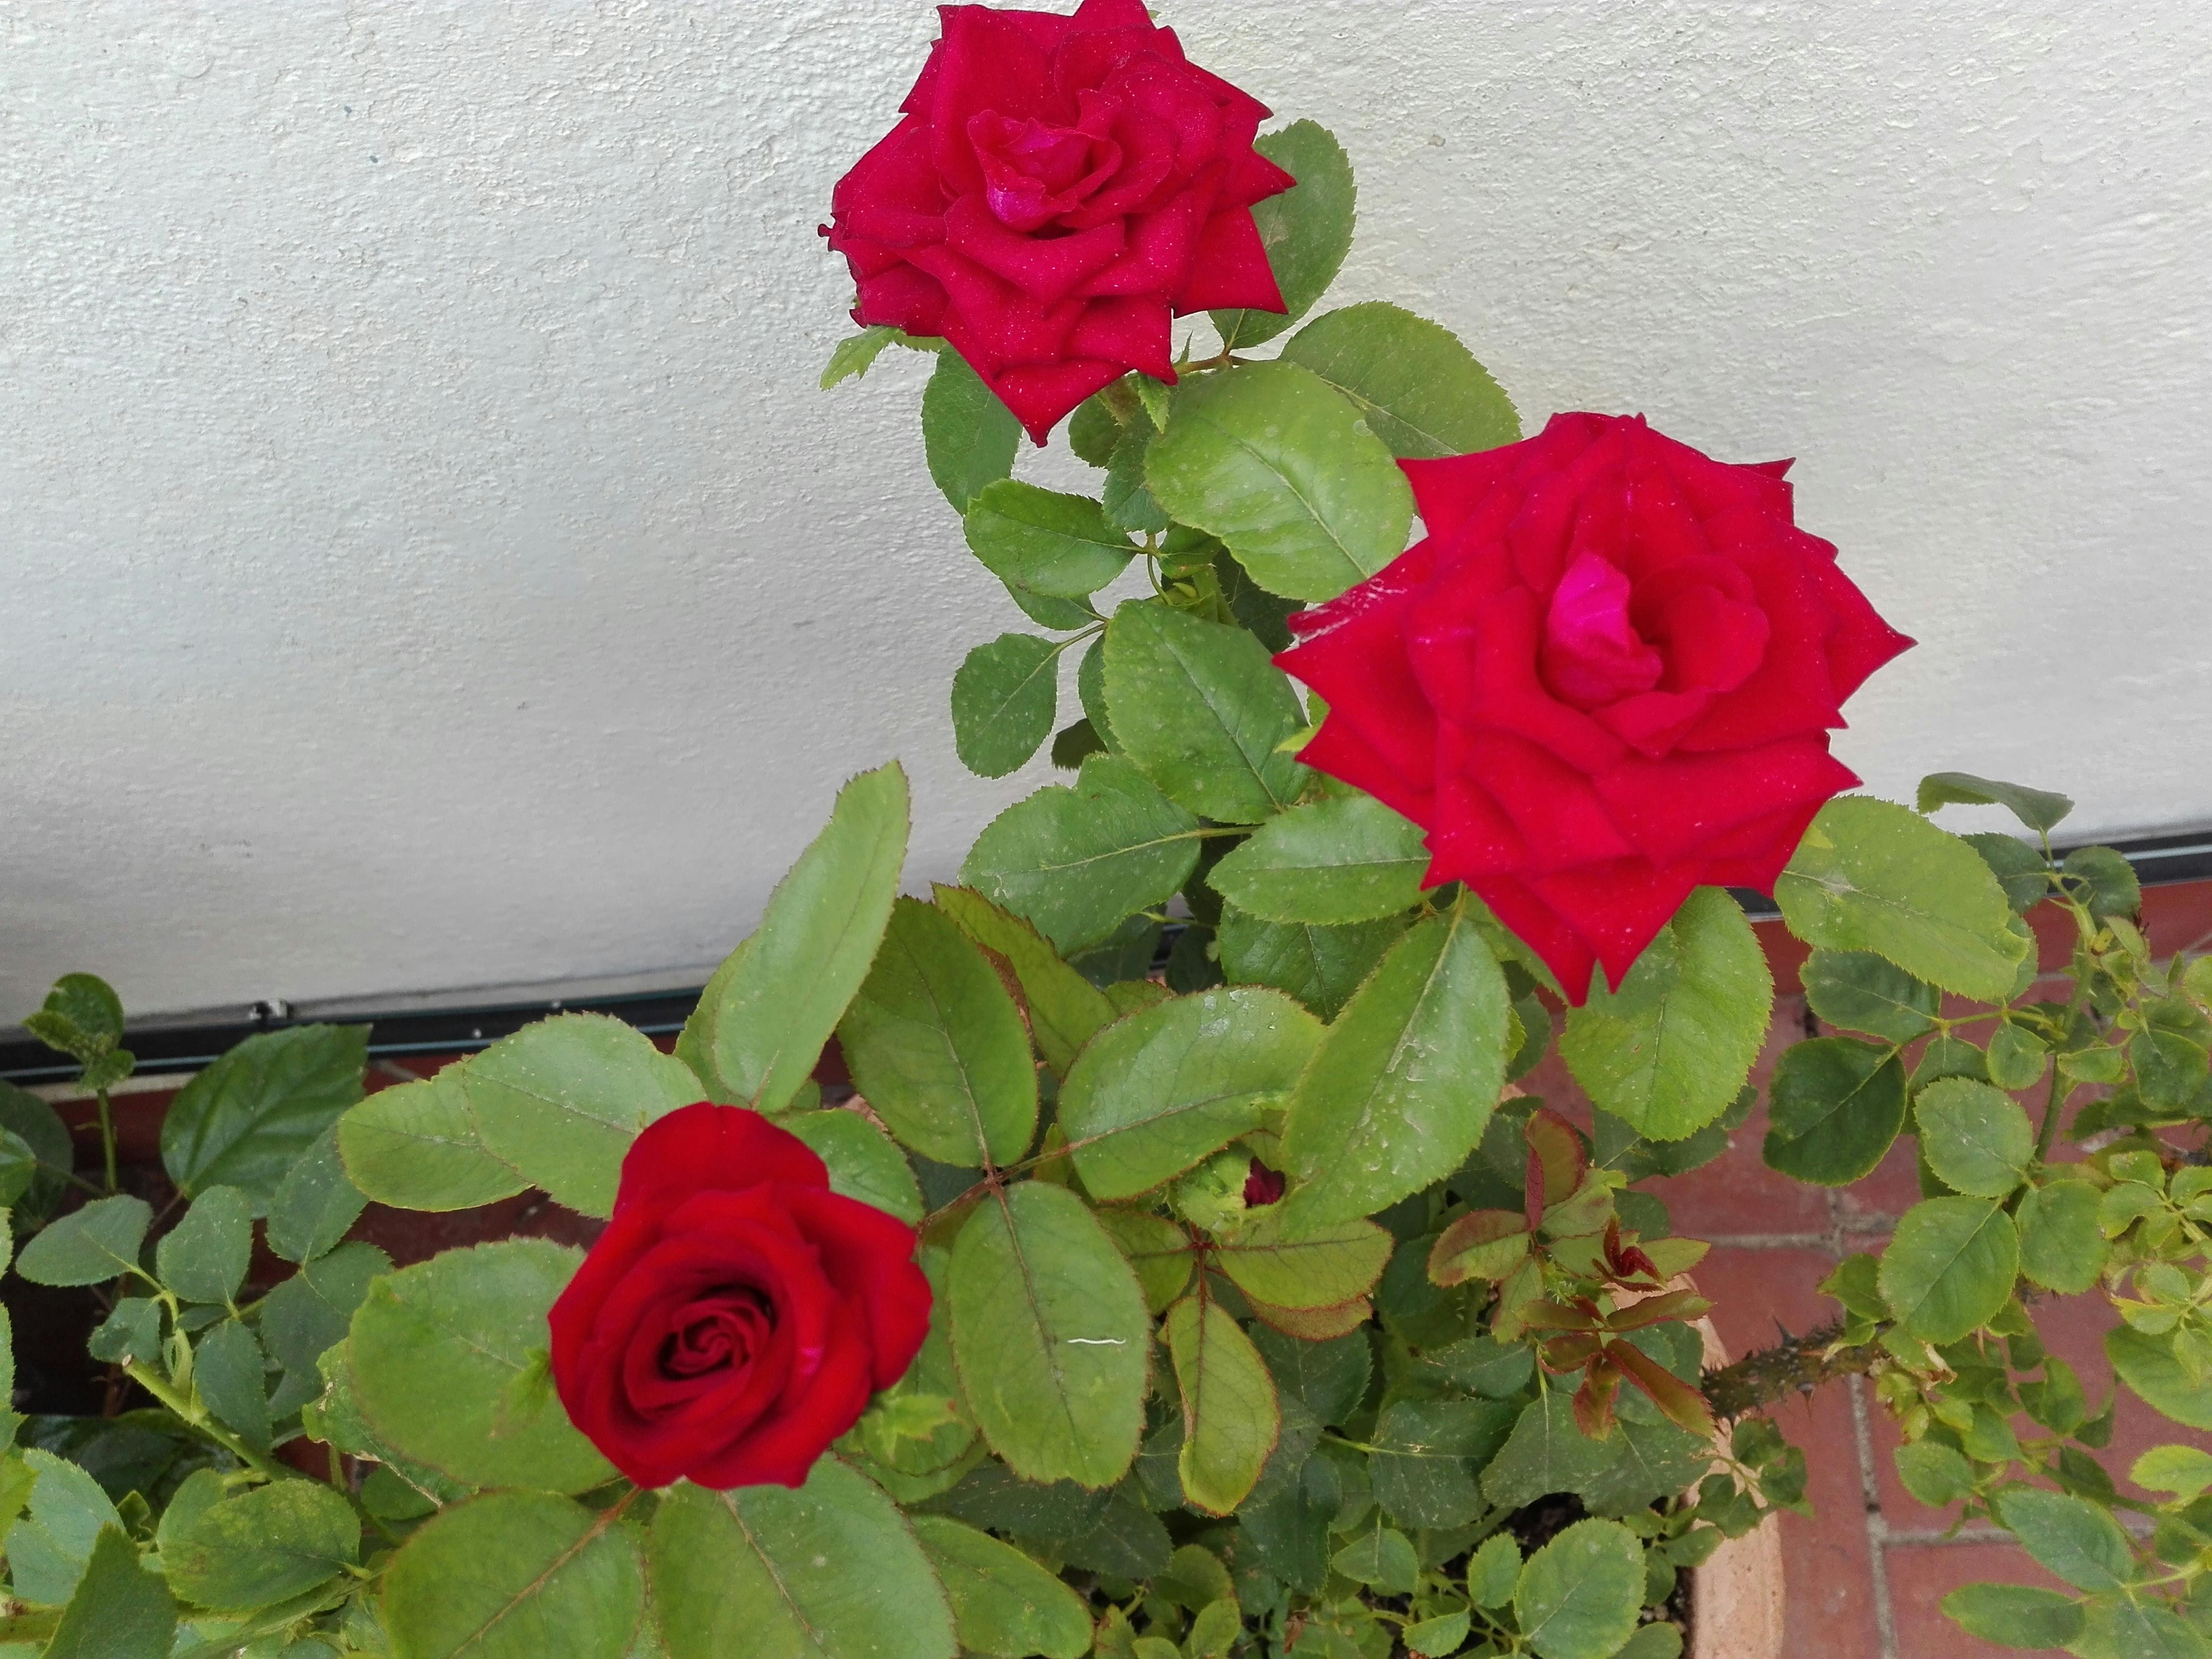 Free stock photo of Roses plants red